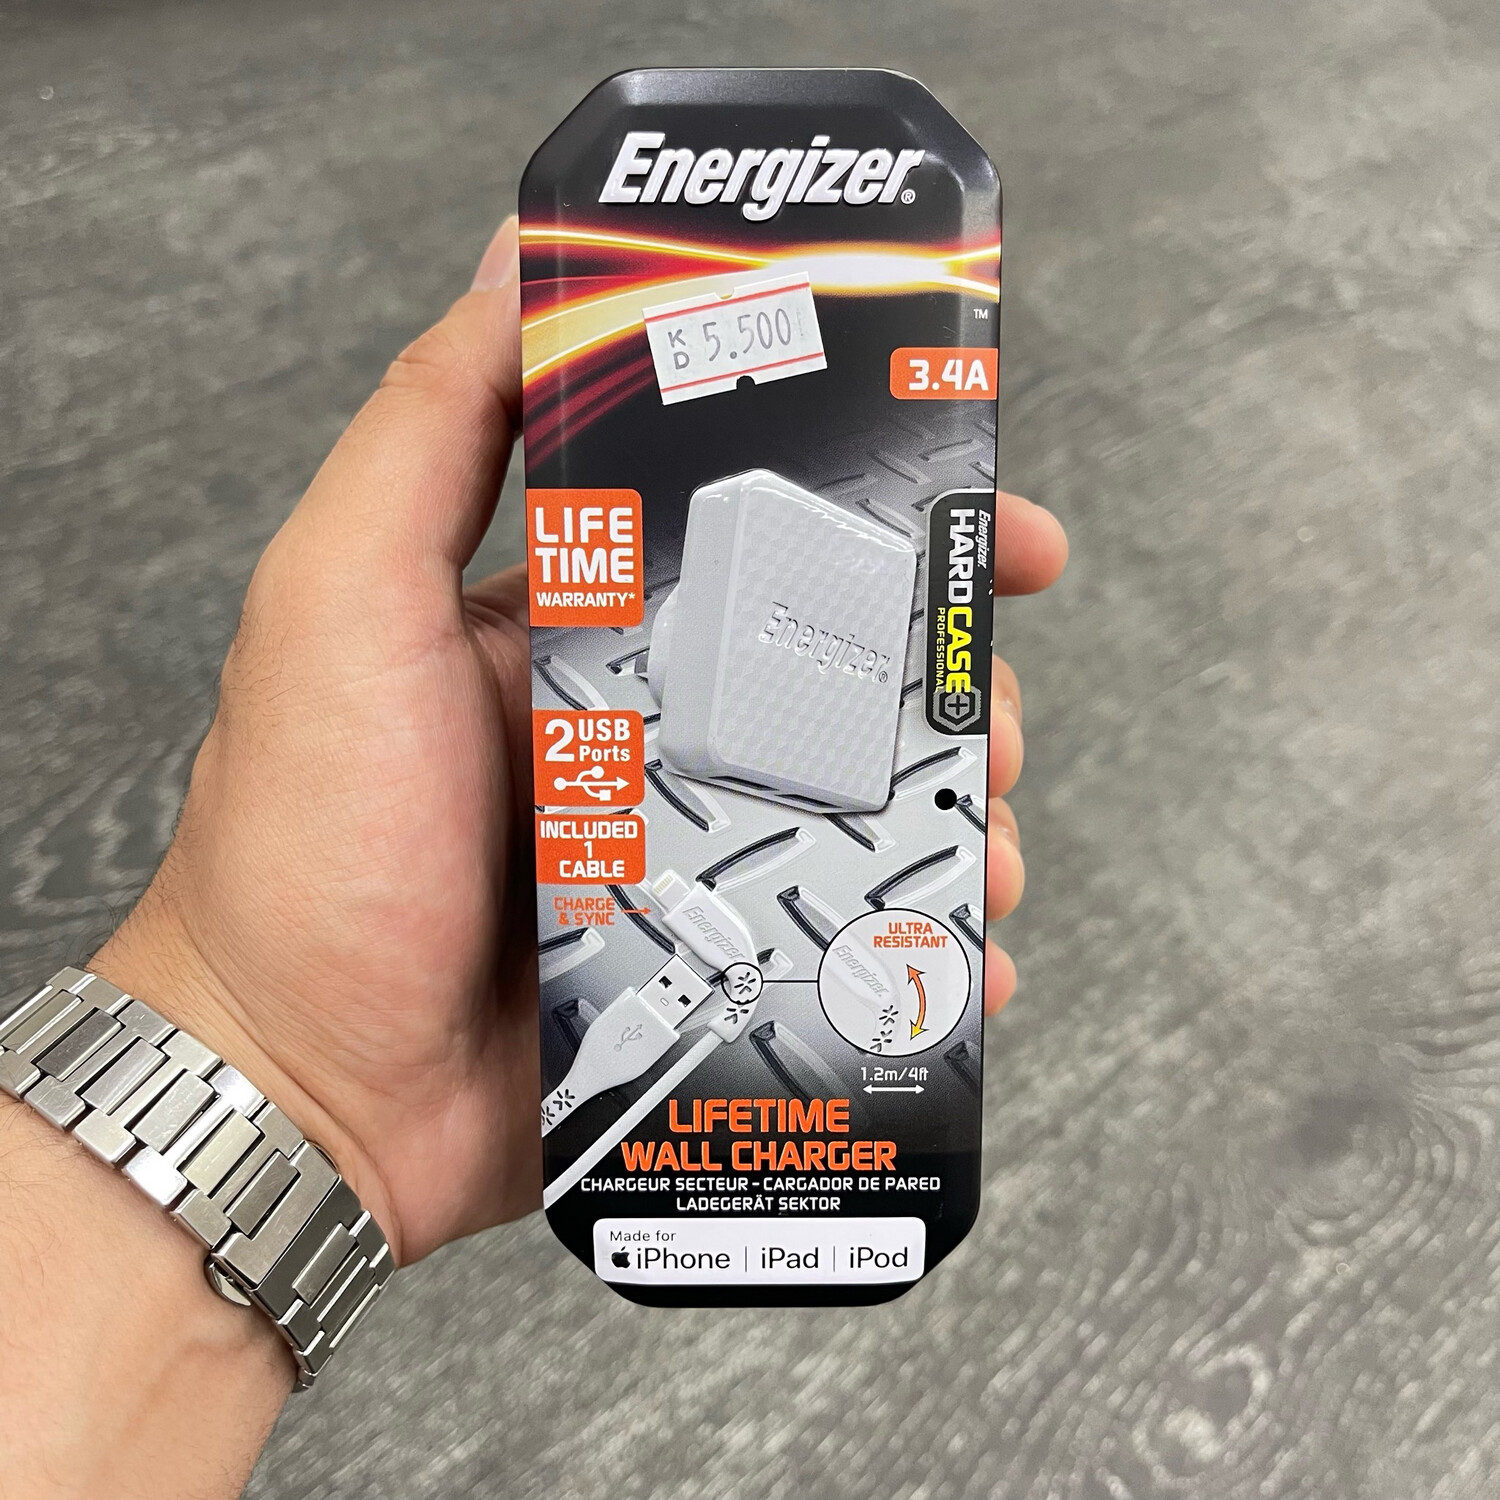 A complete charger from Energizer, for iPhone lightning, with a lifetime warranty Two USB slots, certified by Apple, are resistant to breakage